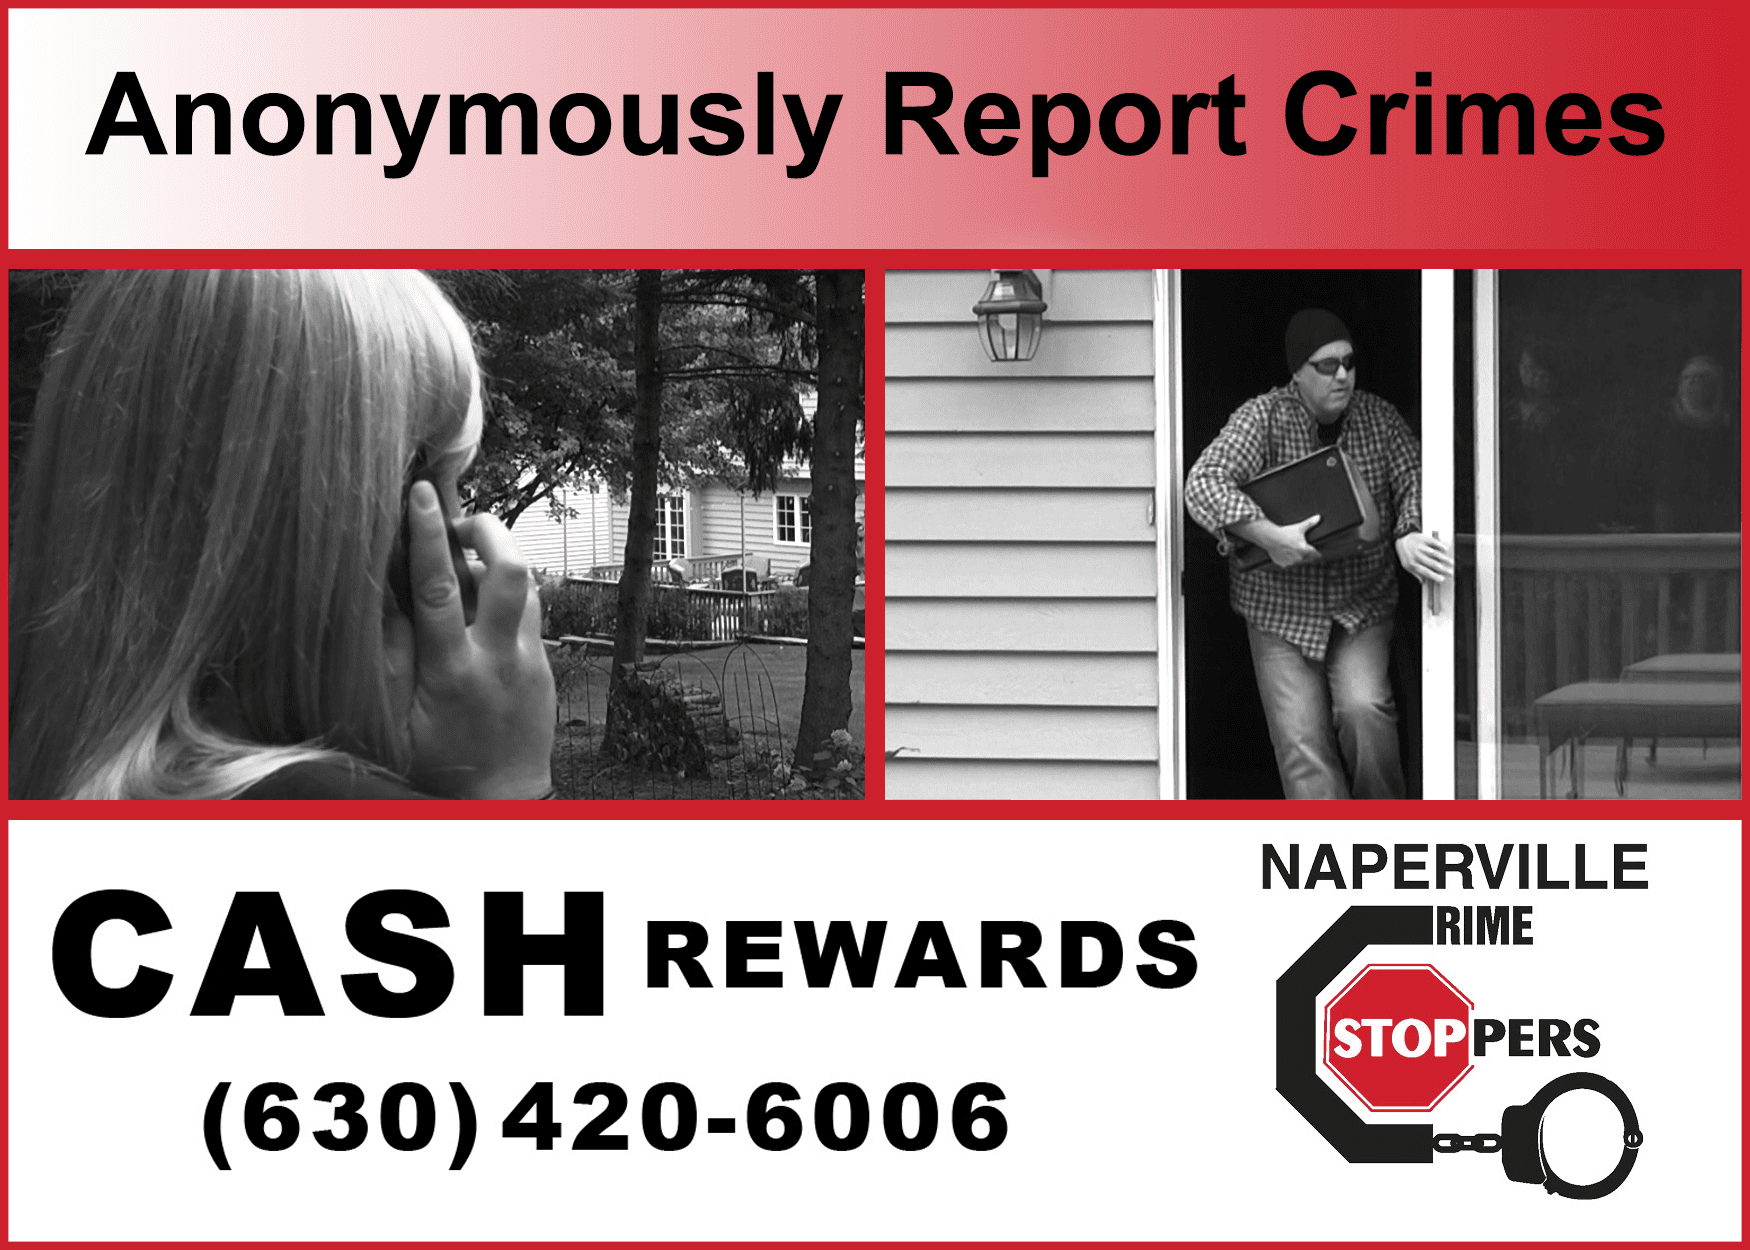 Naperville Crime Stoppers. Anonymously report crimes. Cash rewards.